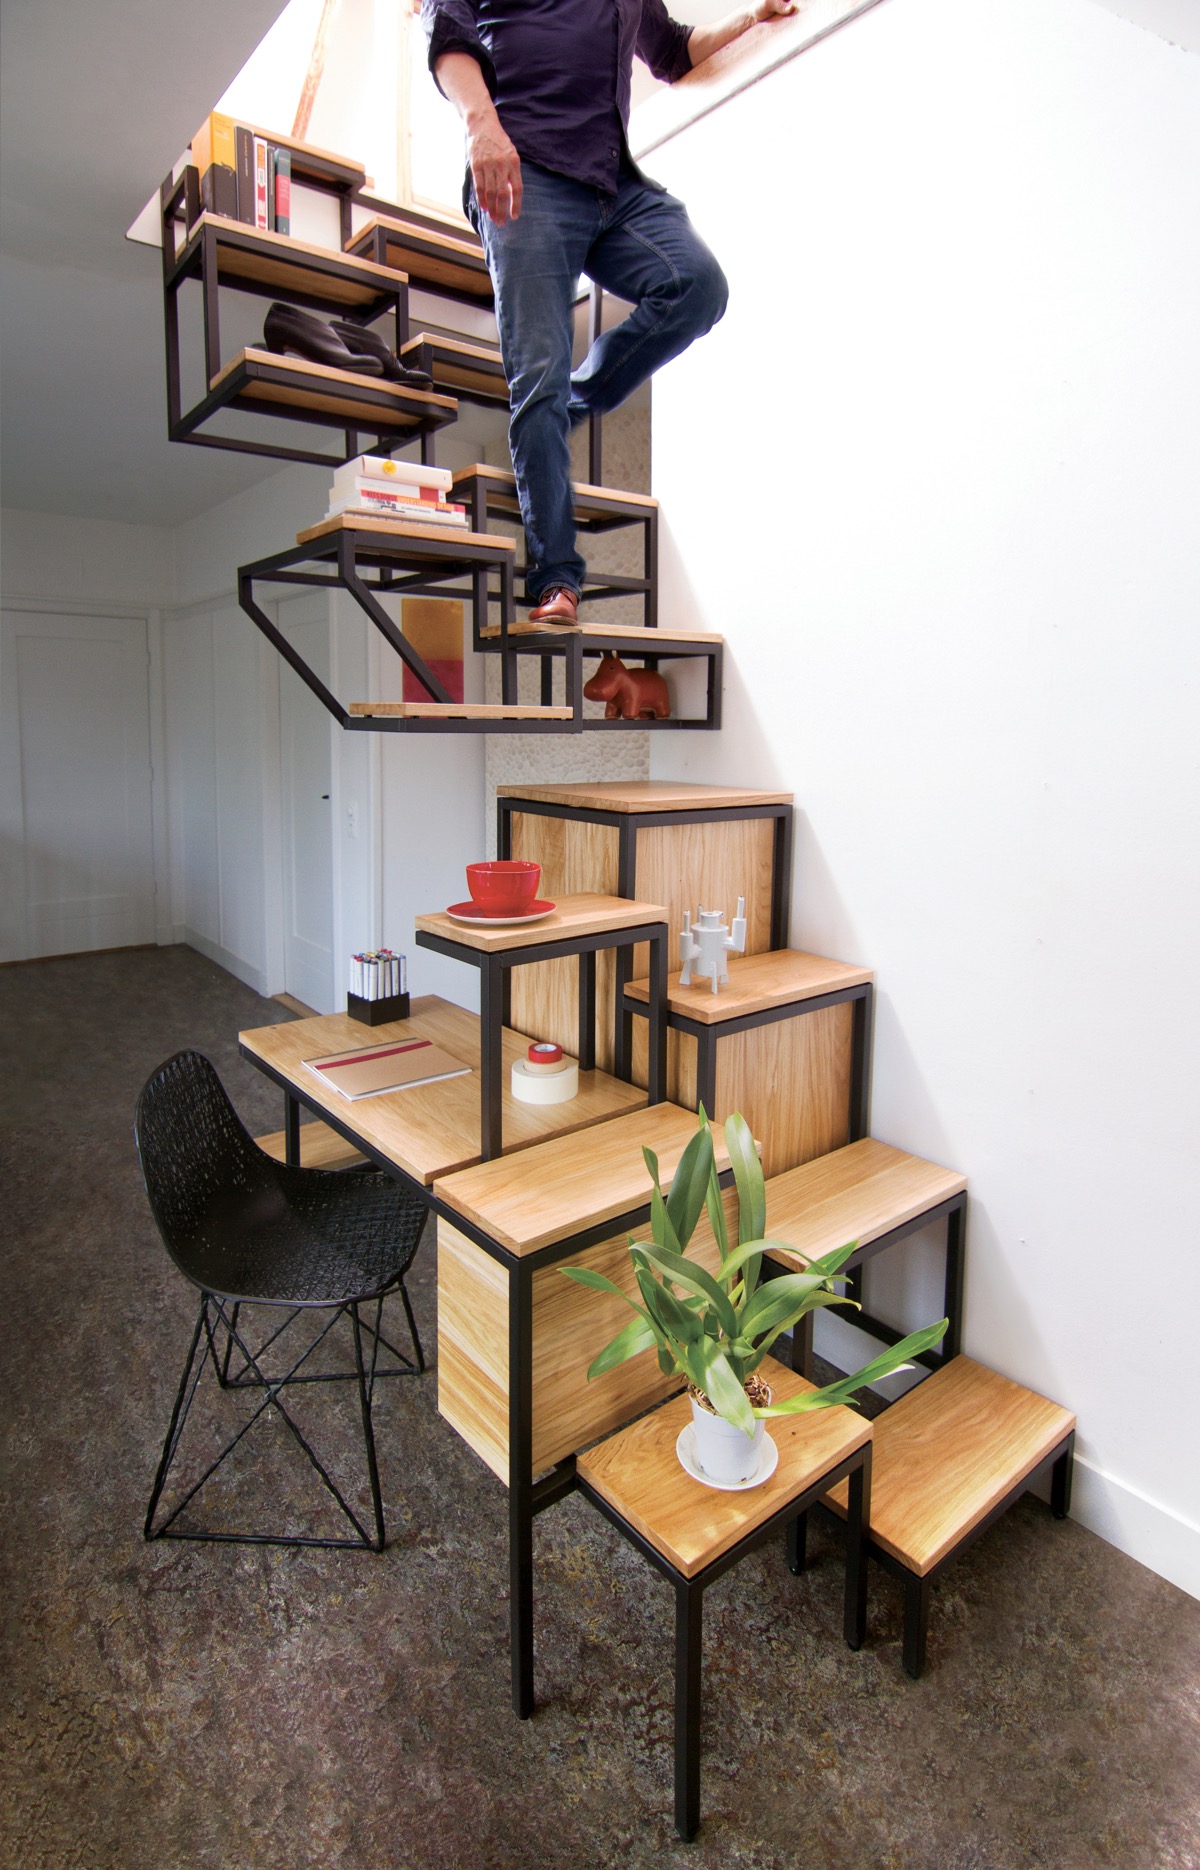 Another home workspace is tucked at the base of this much smaller storage staircase. This one includes a plant stand too.